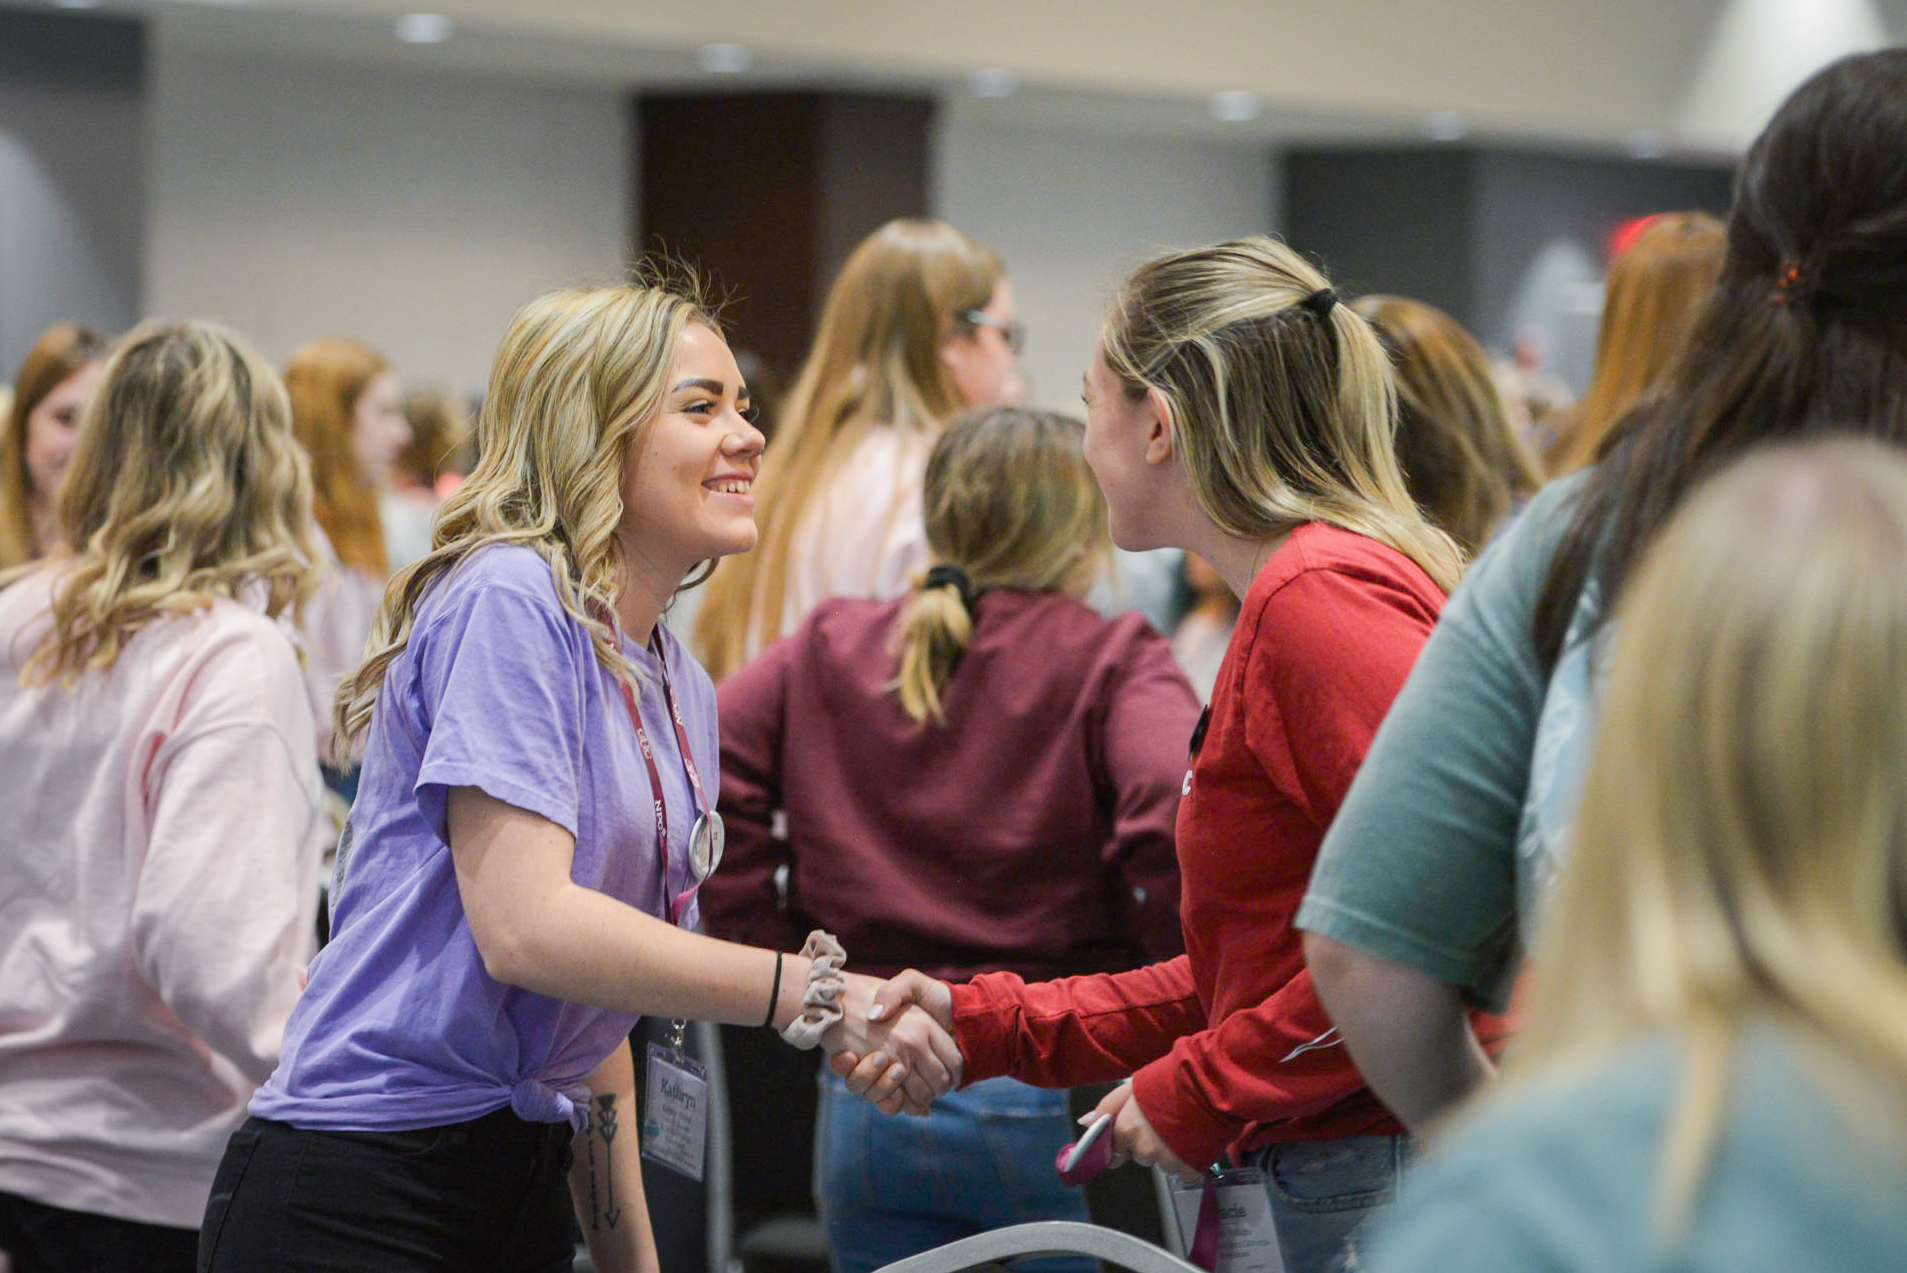 Creating Professional Connections in a Sorority